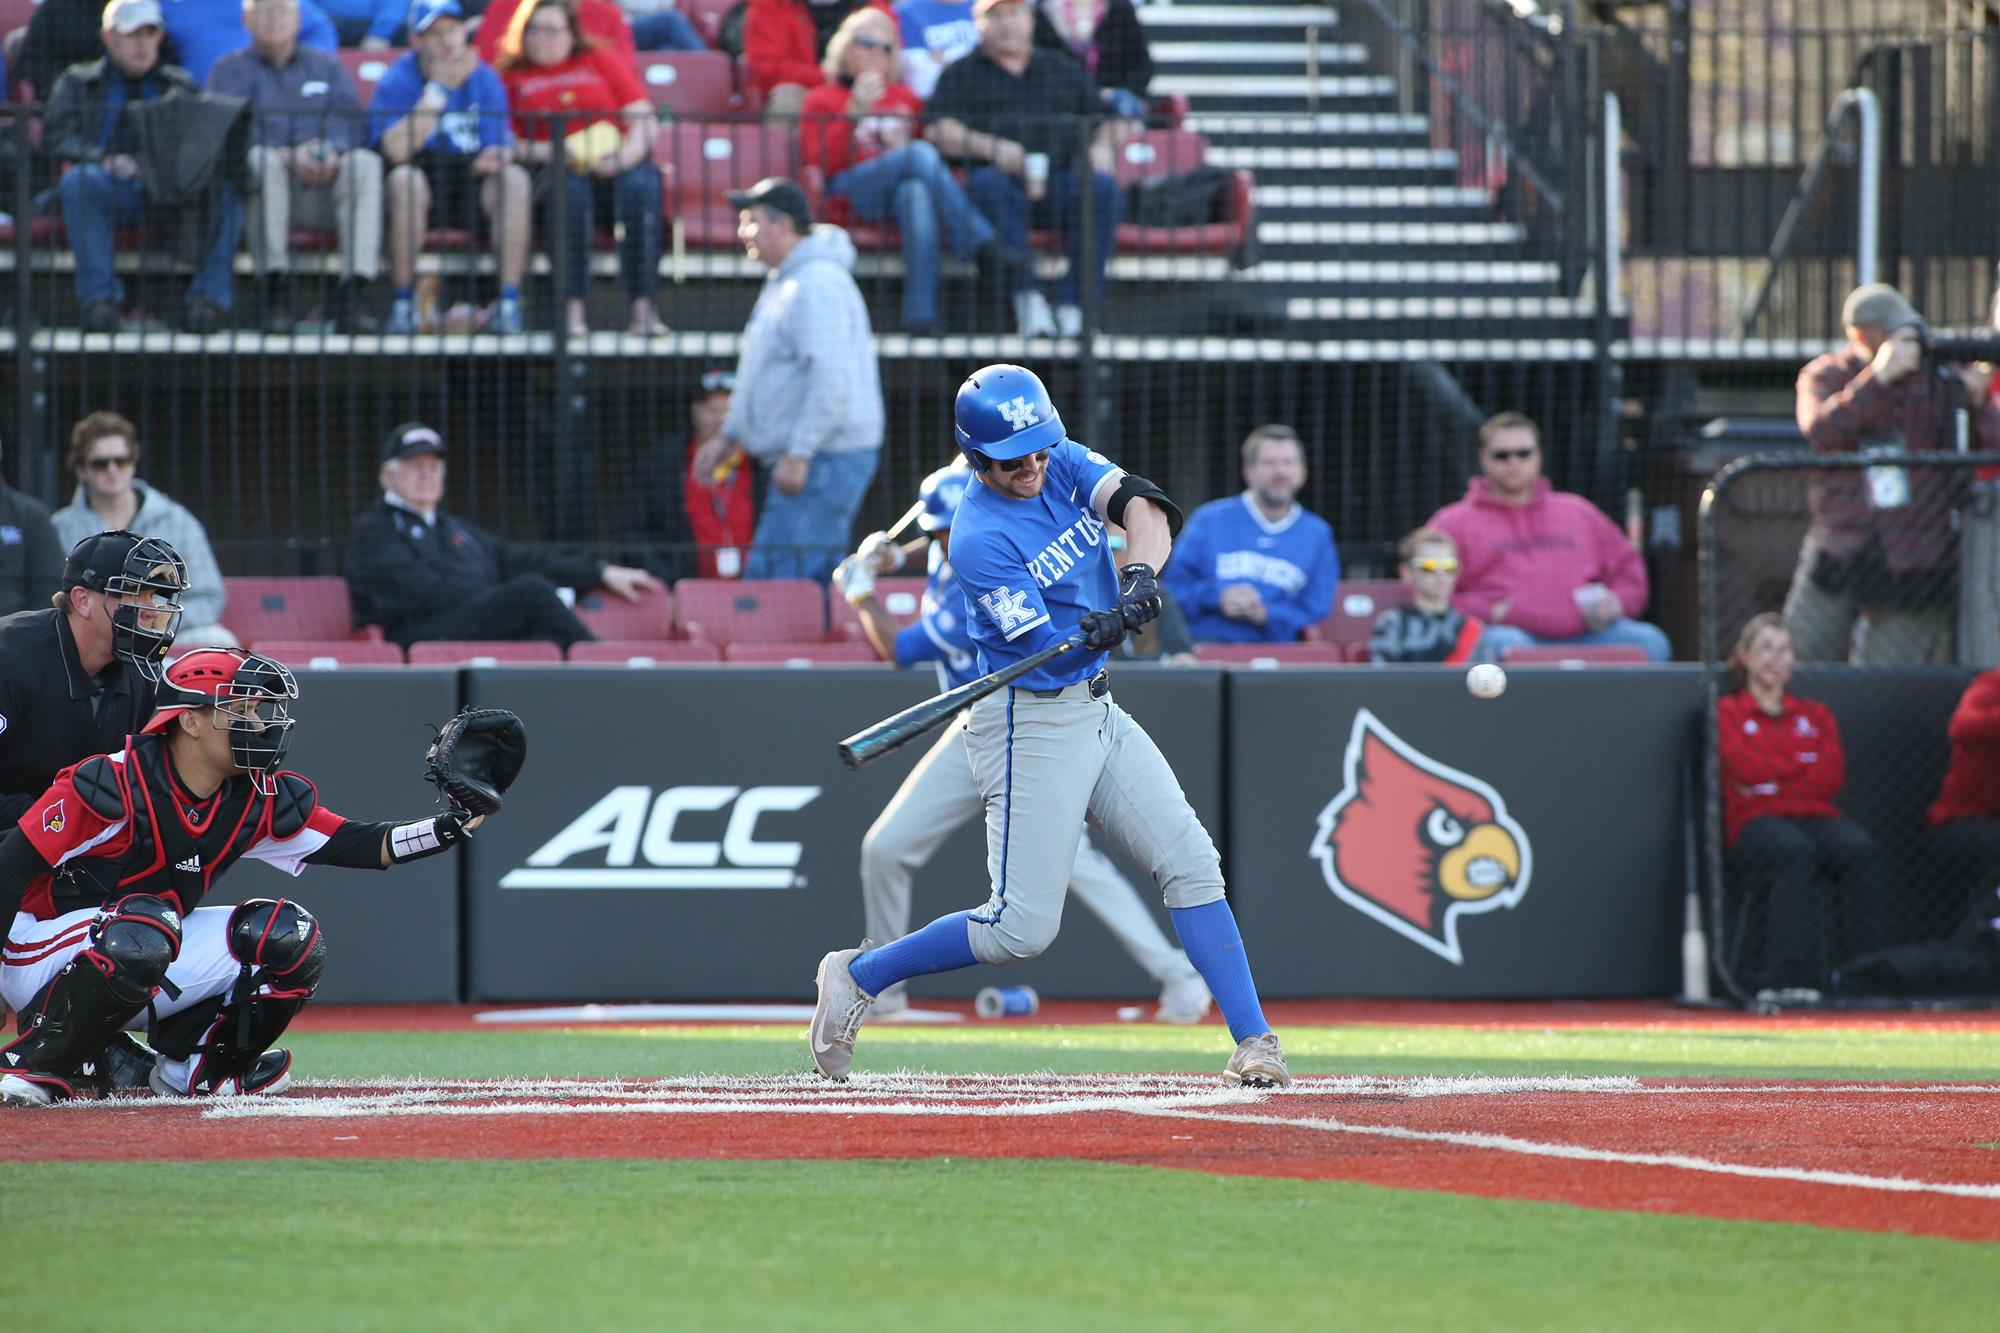 Trey Dawson Homers as Cats Conclude Winning Road Trip